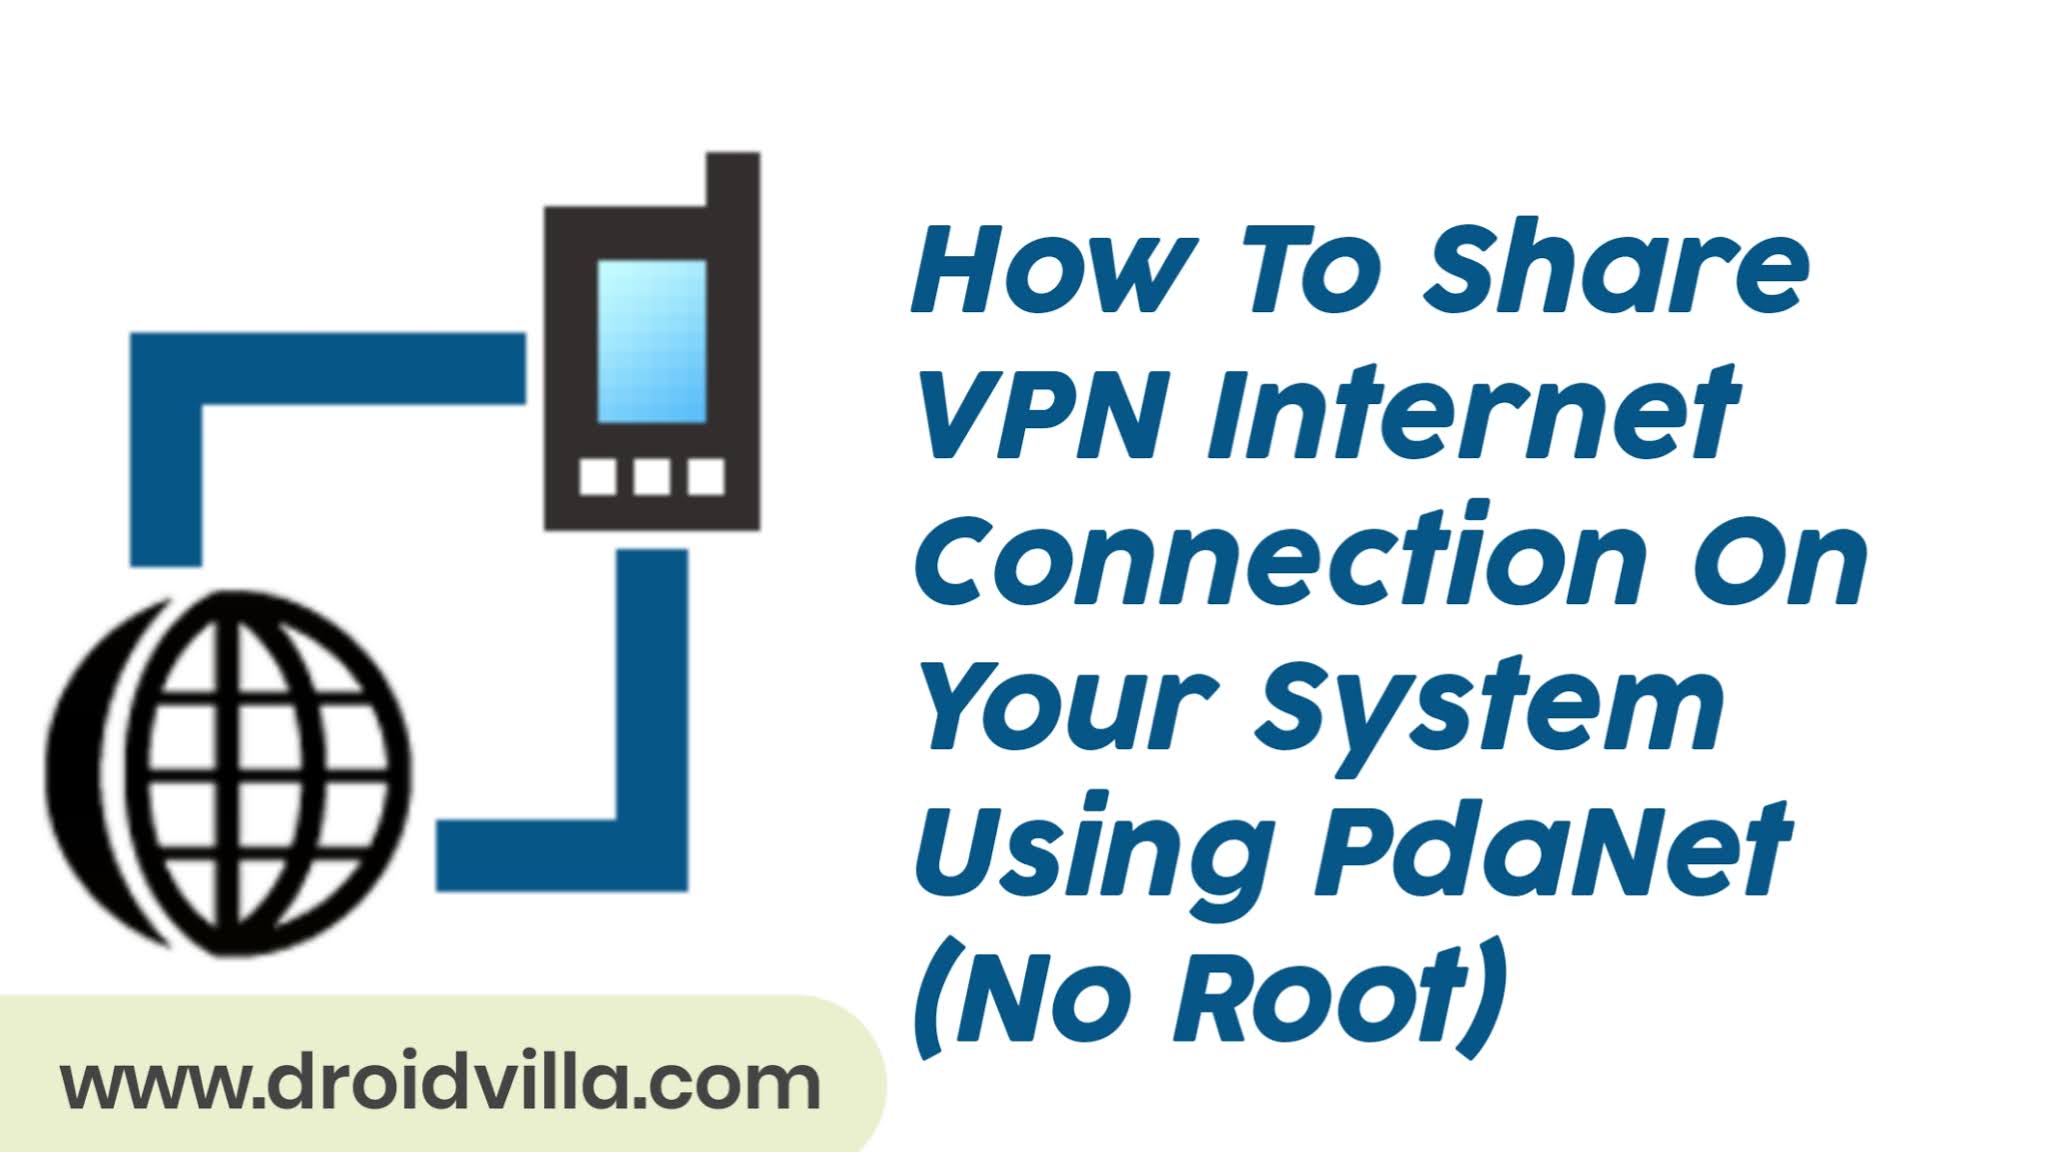 How To Share VPN Internet Connection On Your System Using PdaNet (No Root)